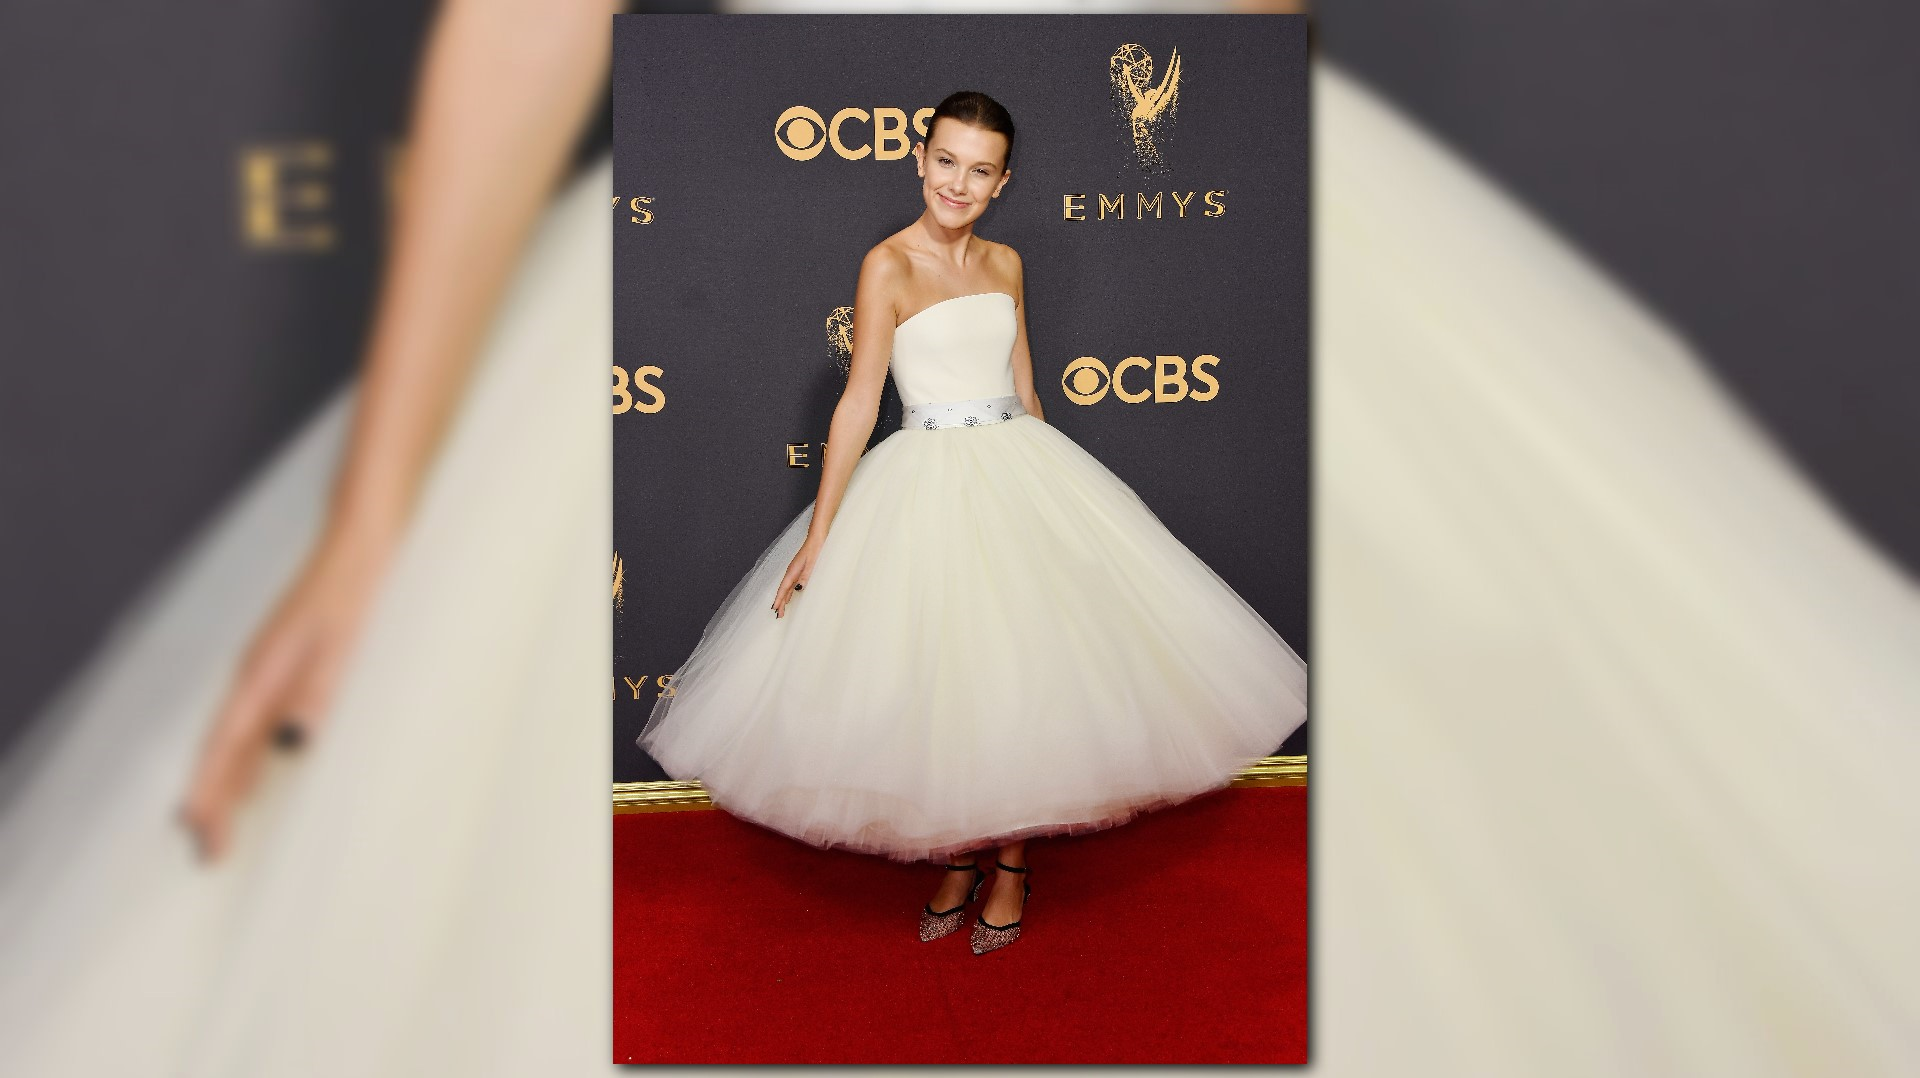 11 of Millie Bobby Brown's best red carpet looks